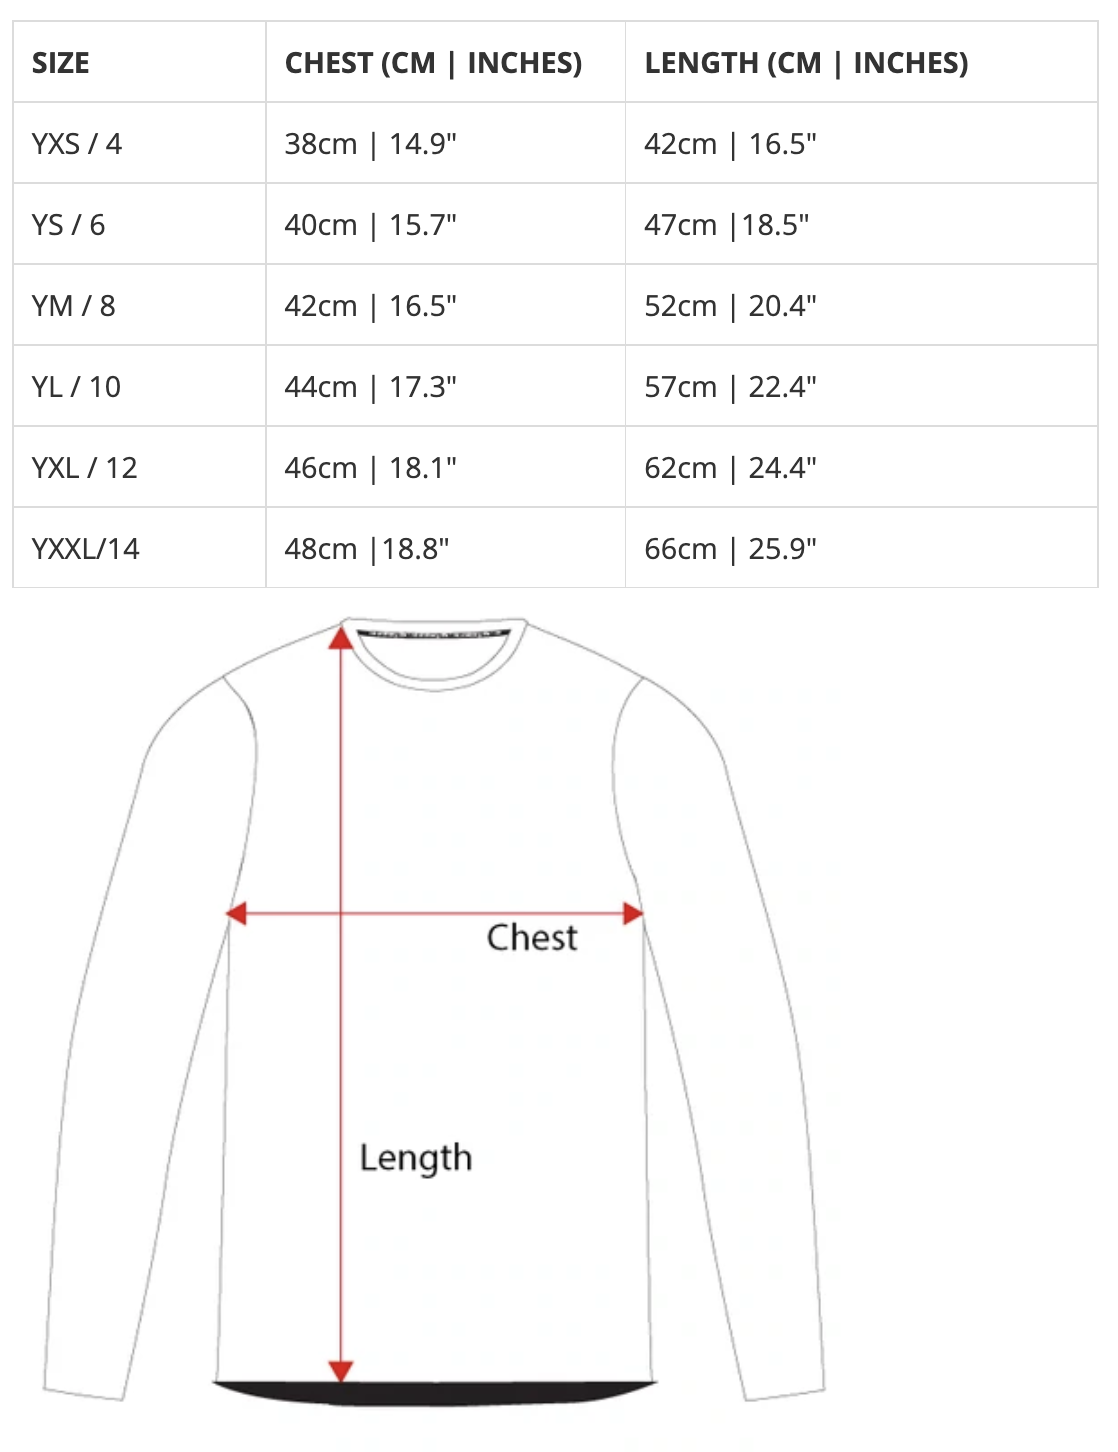 Product Size Guide Image